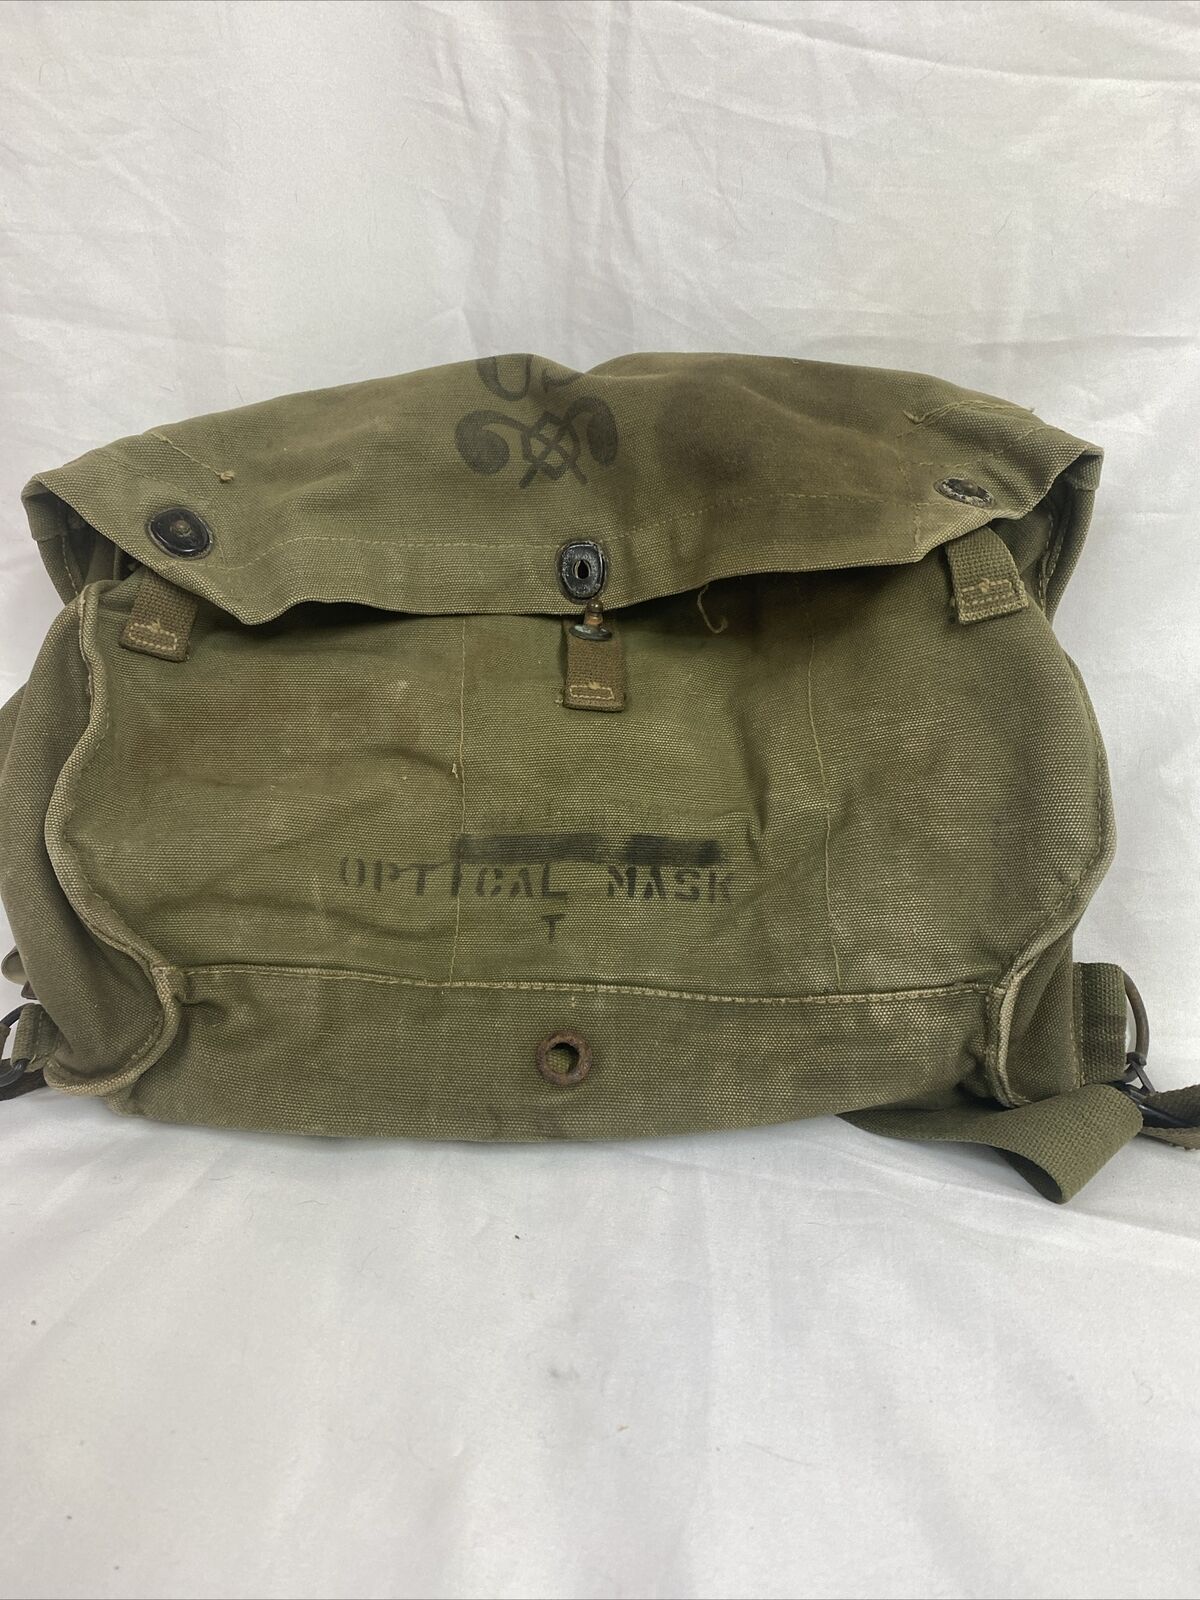 Vintage WWII United States Army Lightweight Optical Service Mask Canvas Bag Case